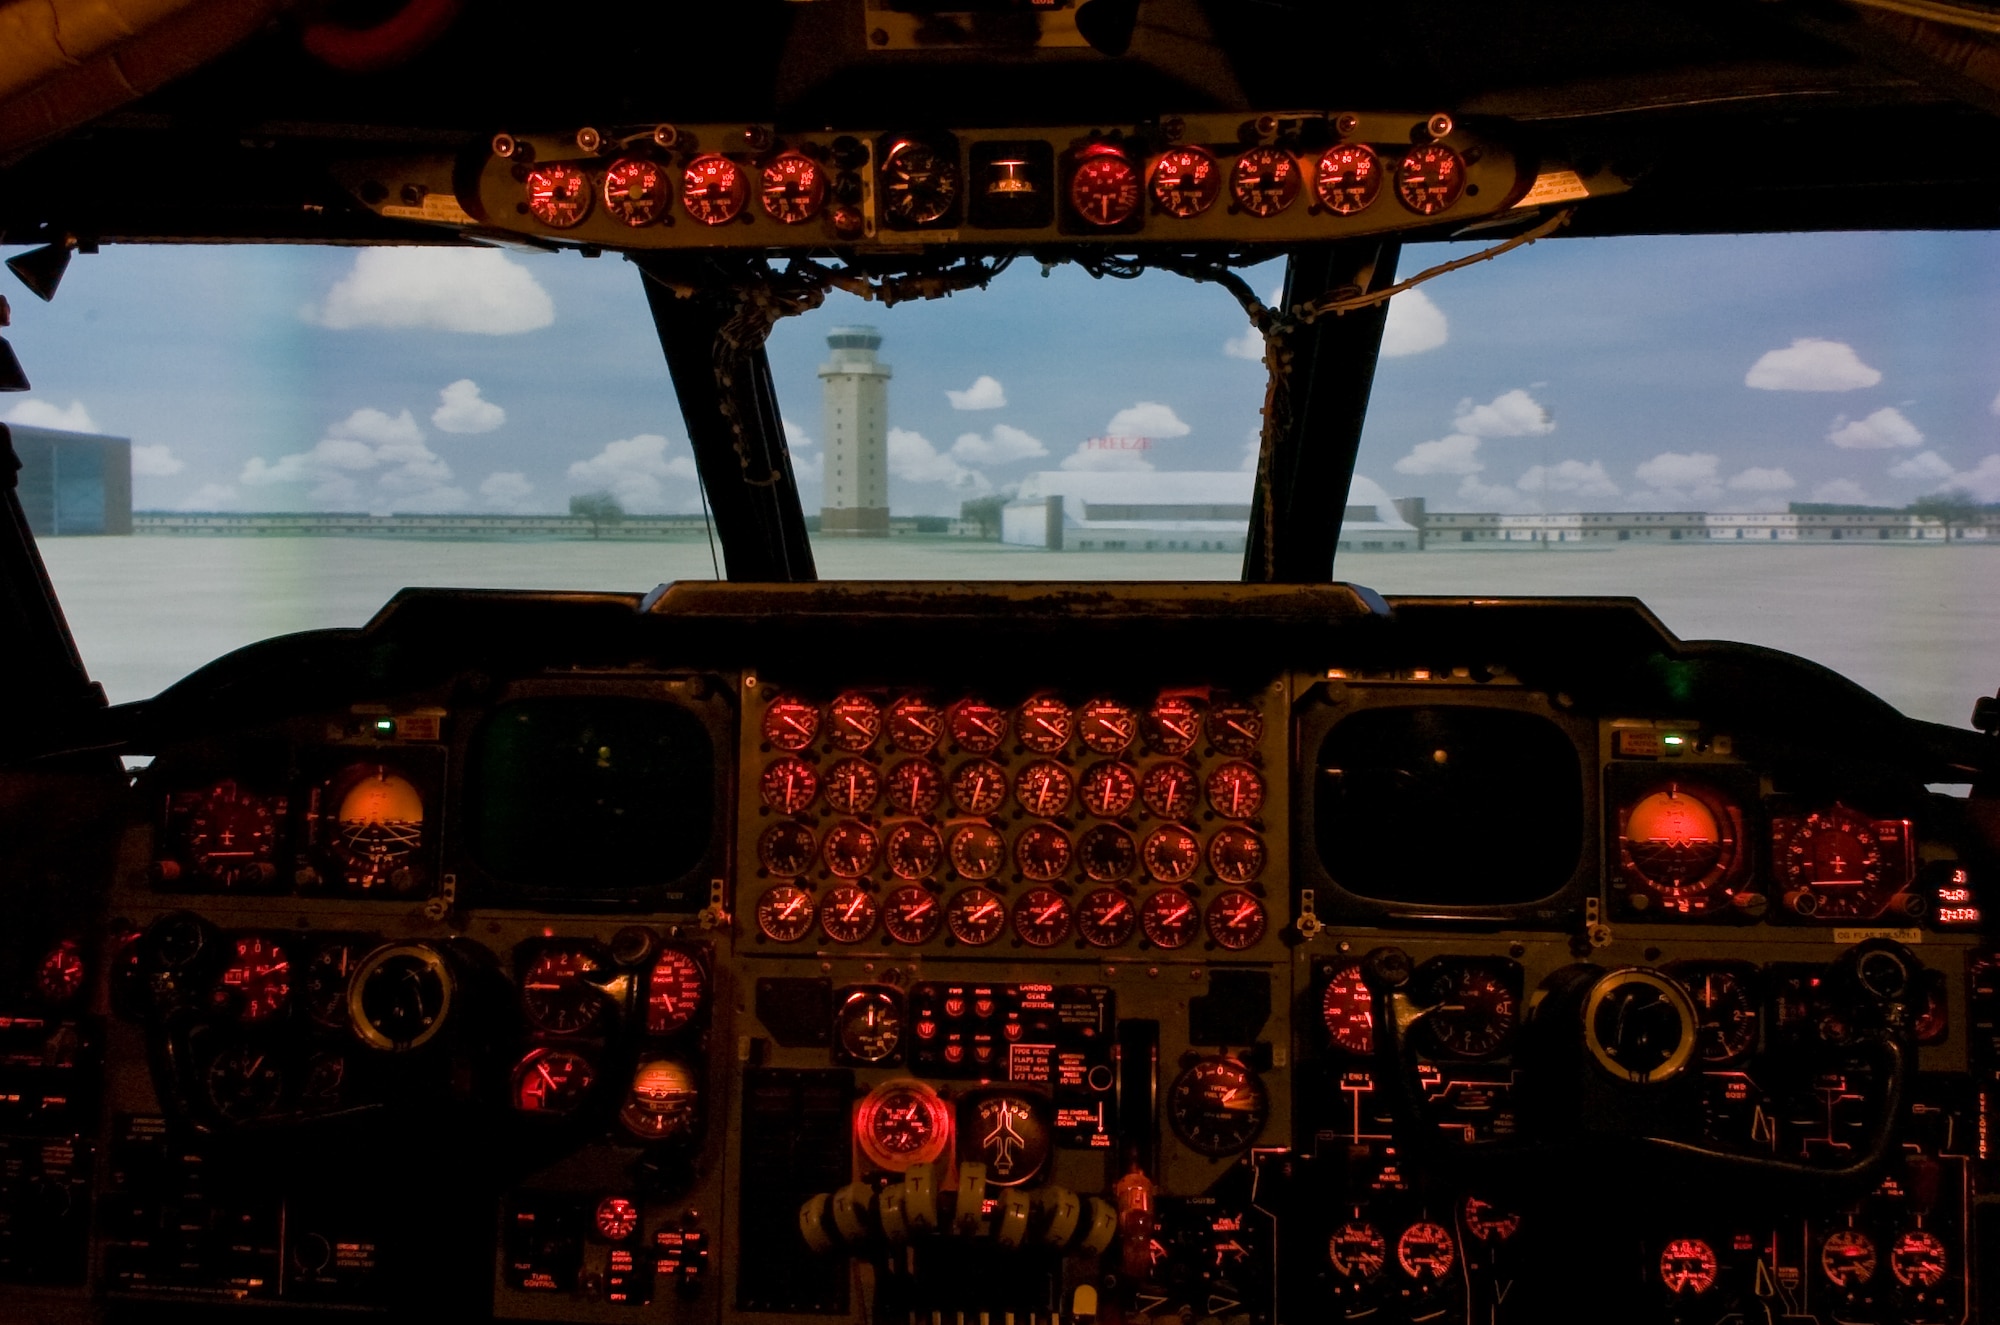 A virtual Barksdale Air Force Base, La., flightline can be seen through the windshield of a B-52 Stratofortress simulator April 28 at Barksdale AFB. A new dome projection surface provides a more realistic view for pilots training on the simulator. (U.S. Air Force photo by Lance Cheung)